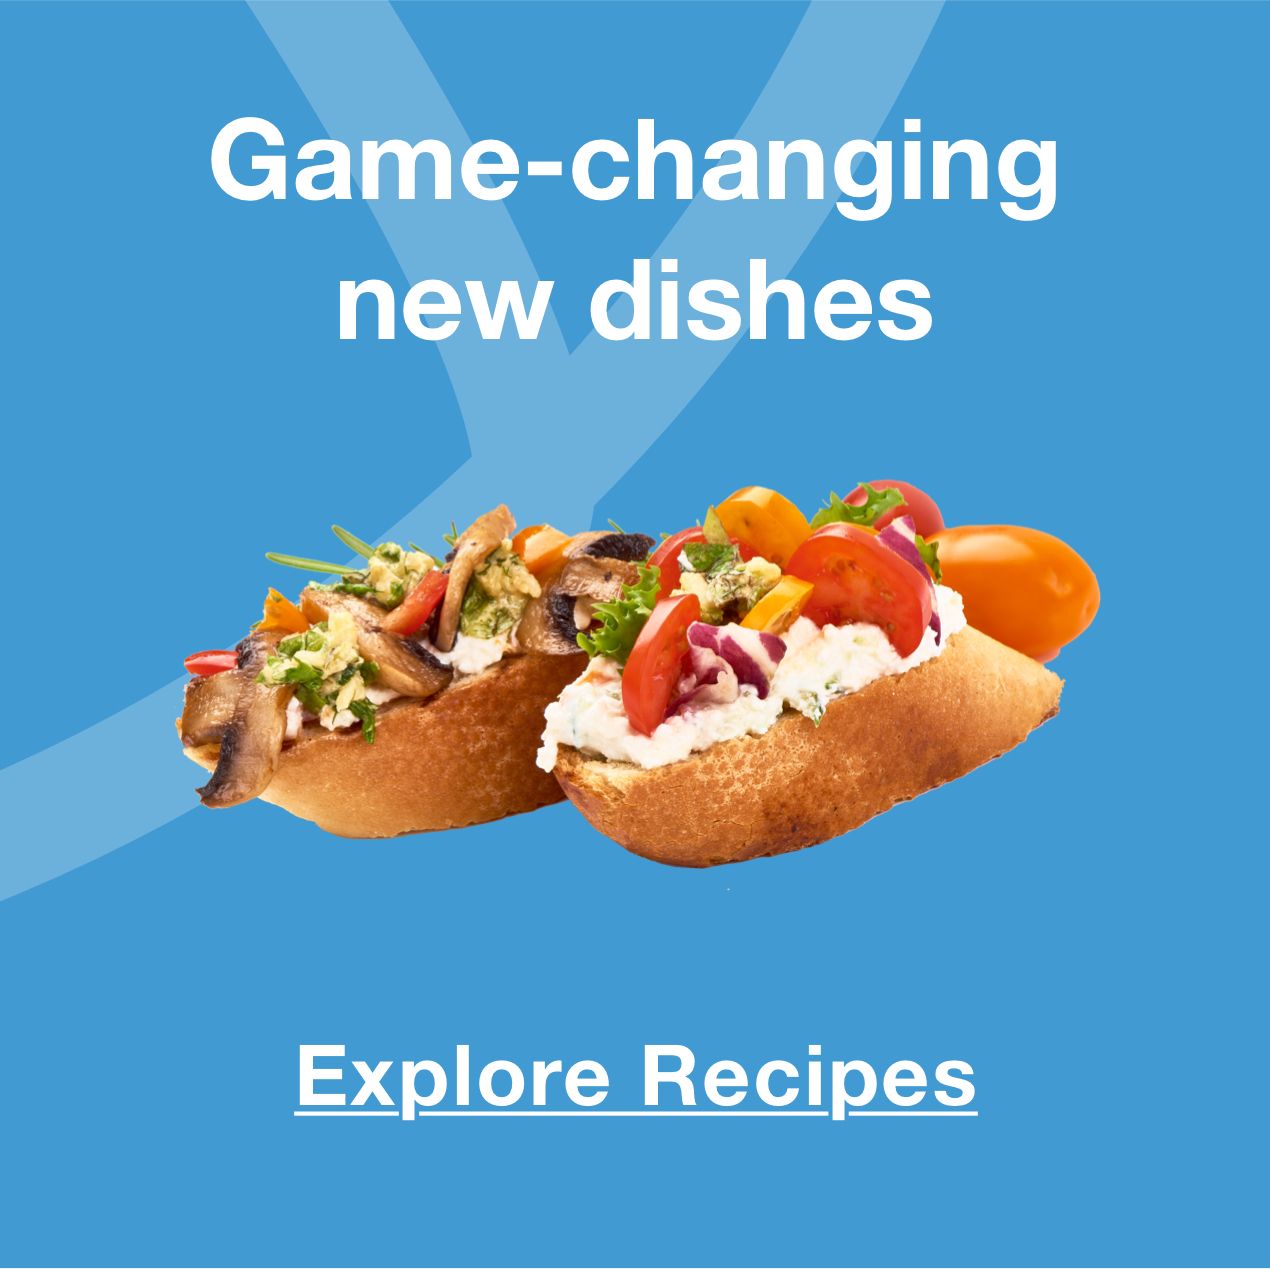 Game-changing new dishes. Click to explore recipes